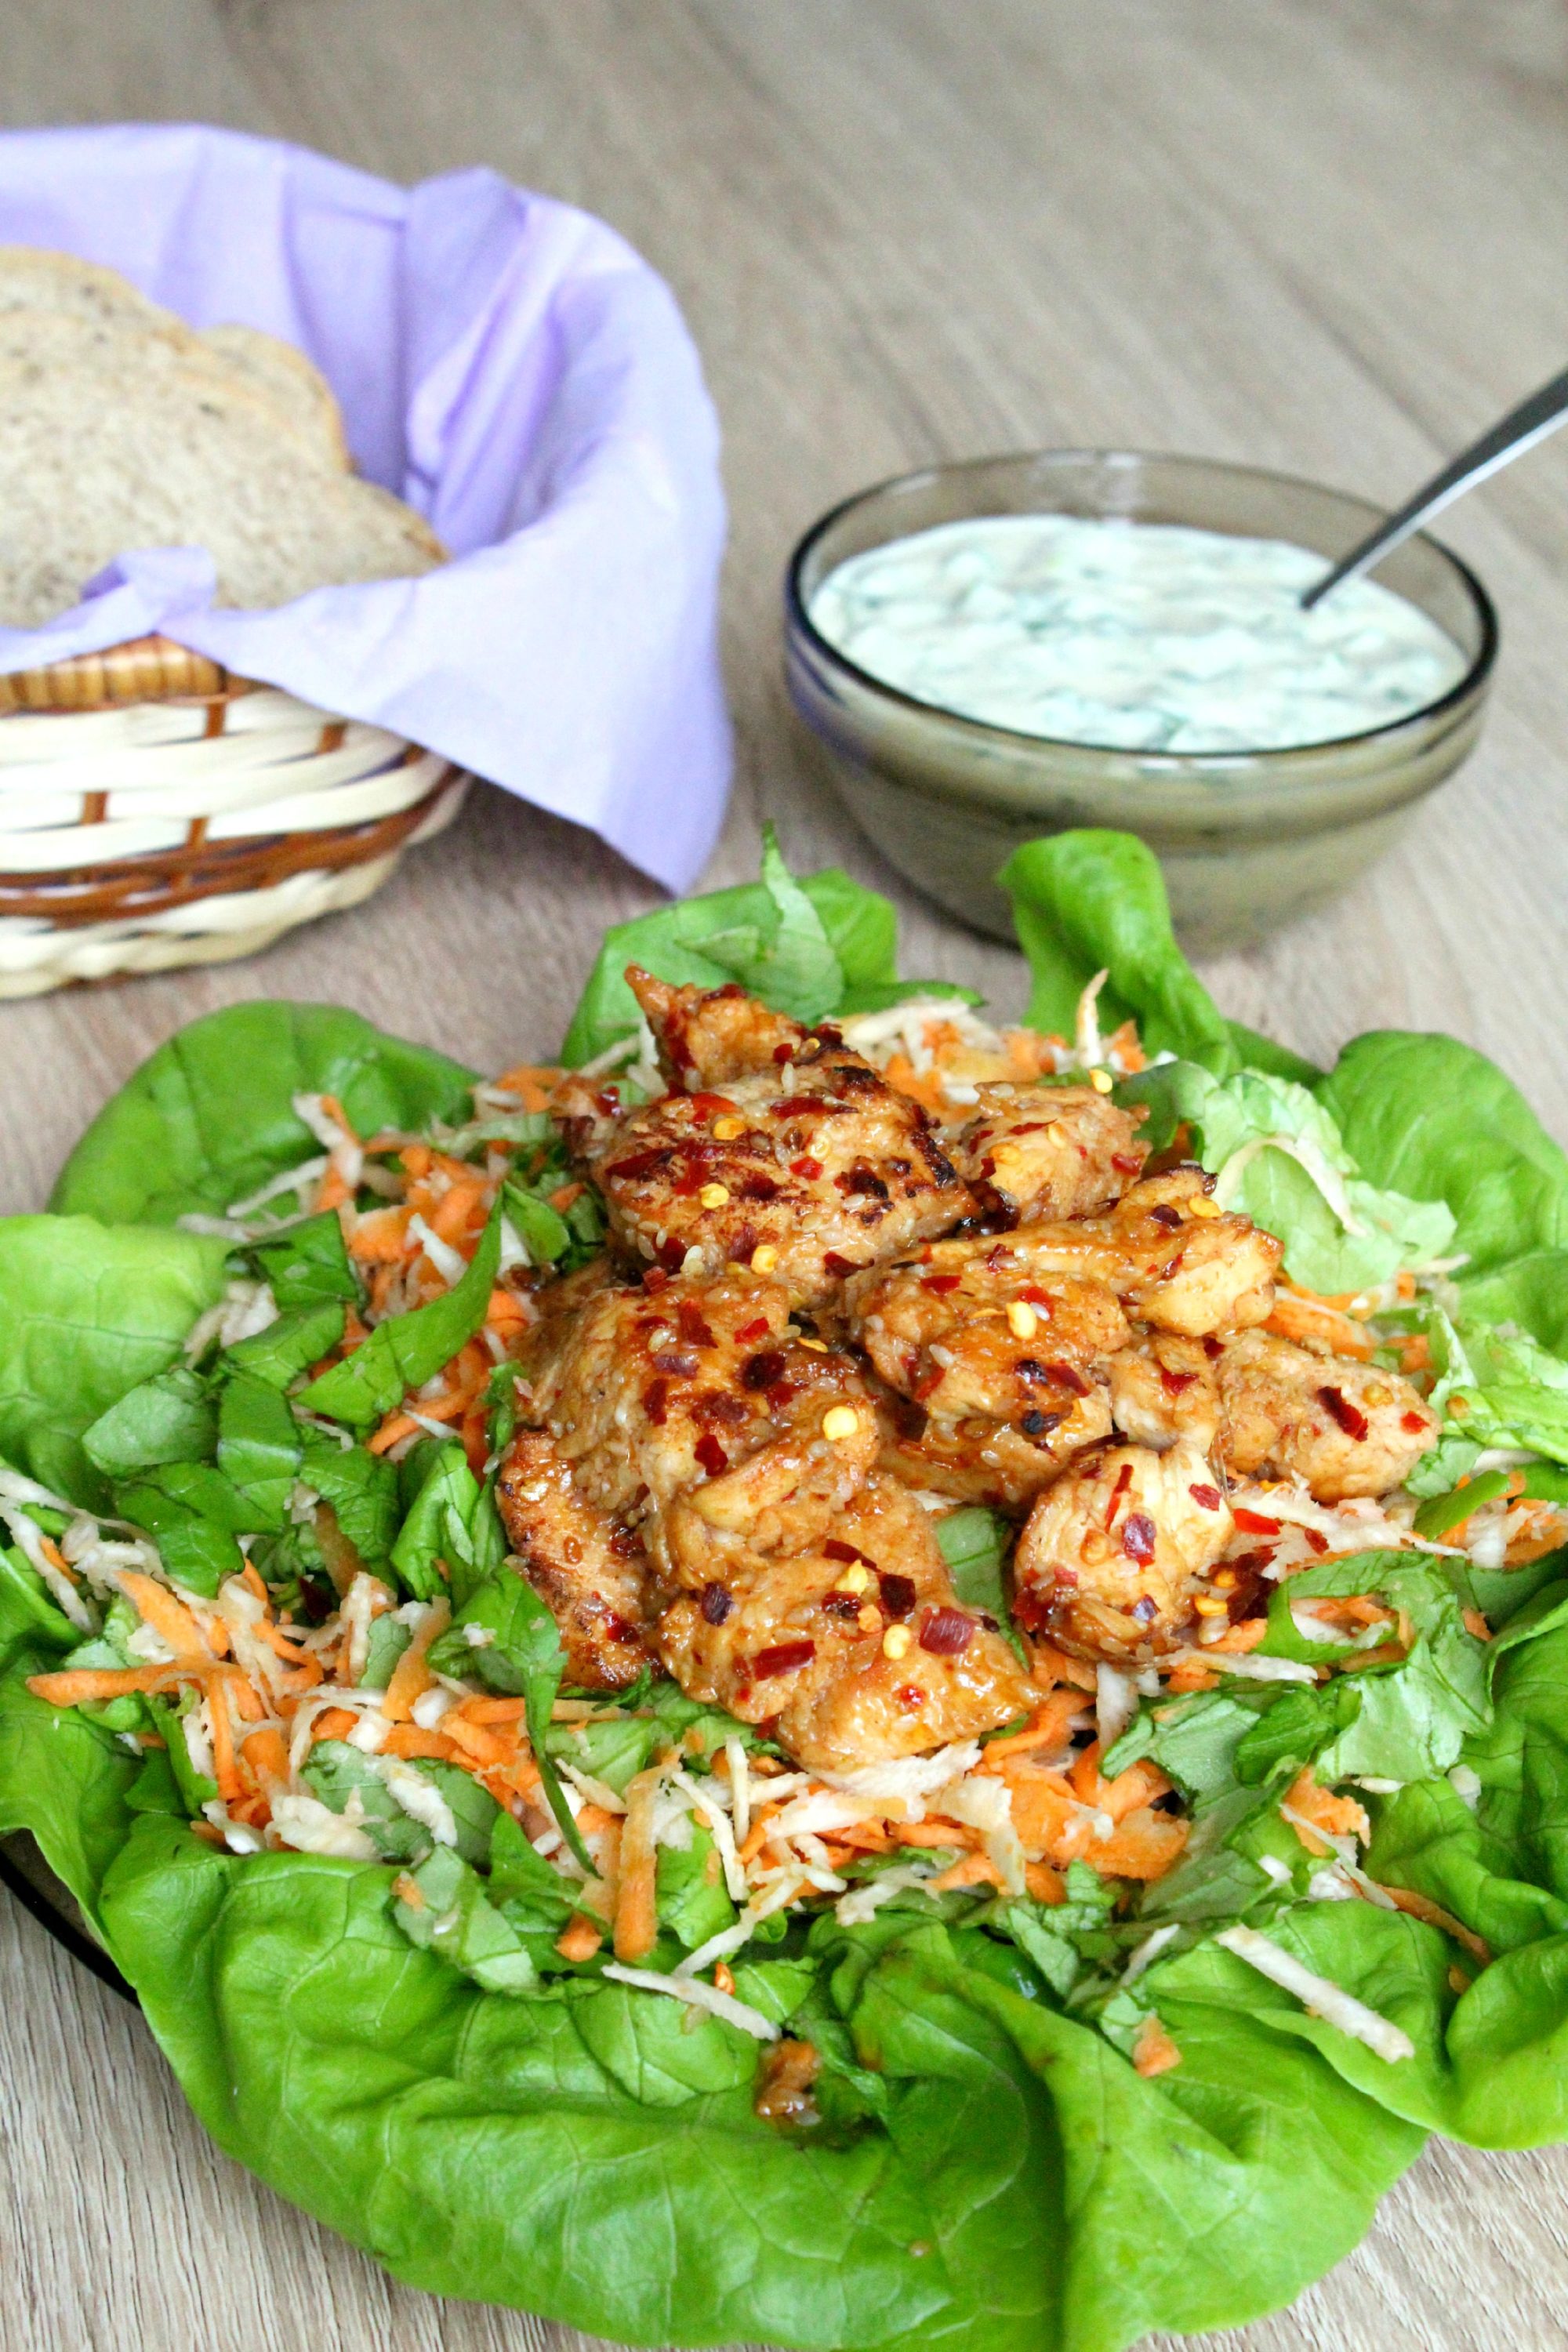 Carrots salad with spicy chicken